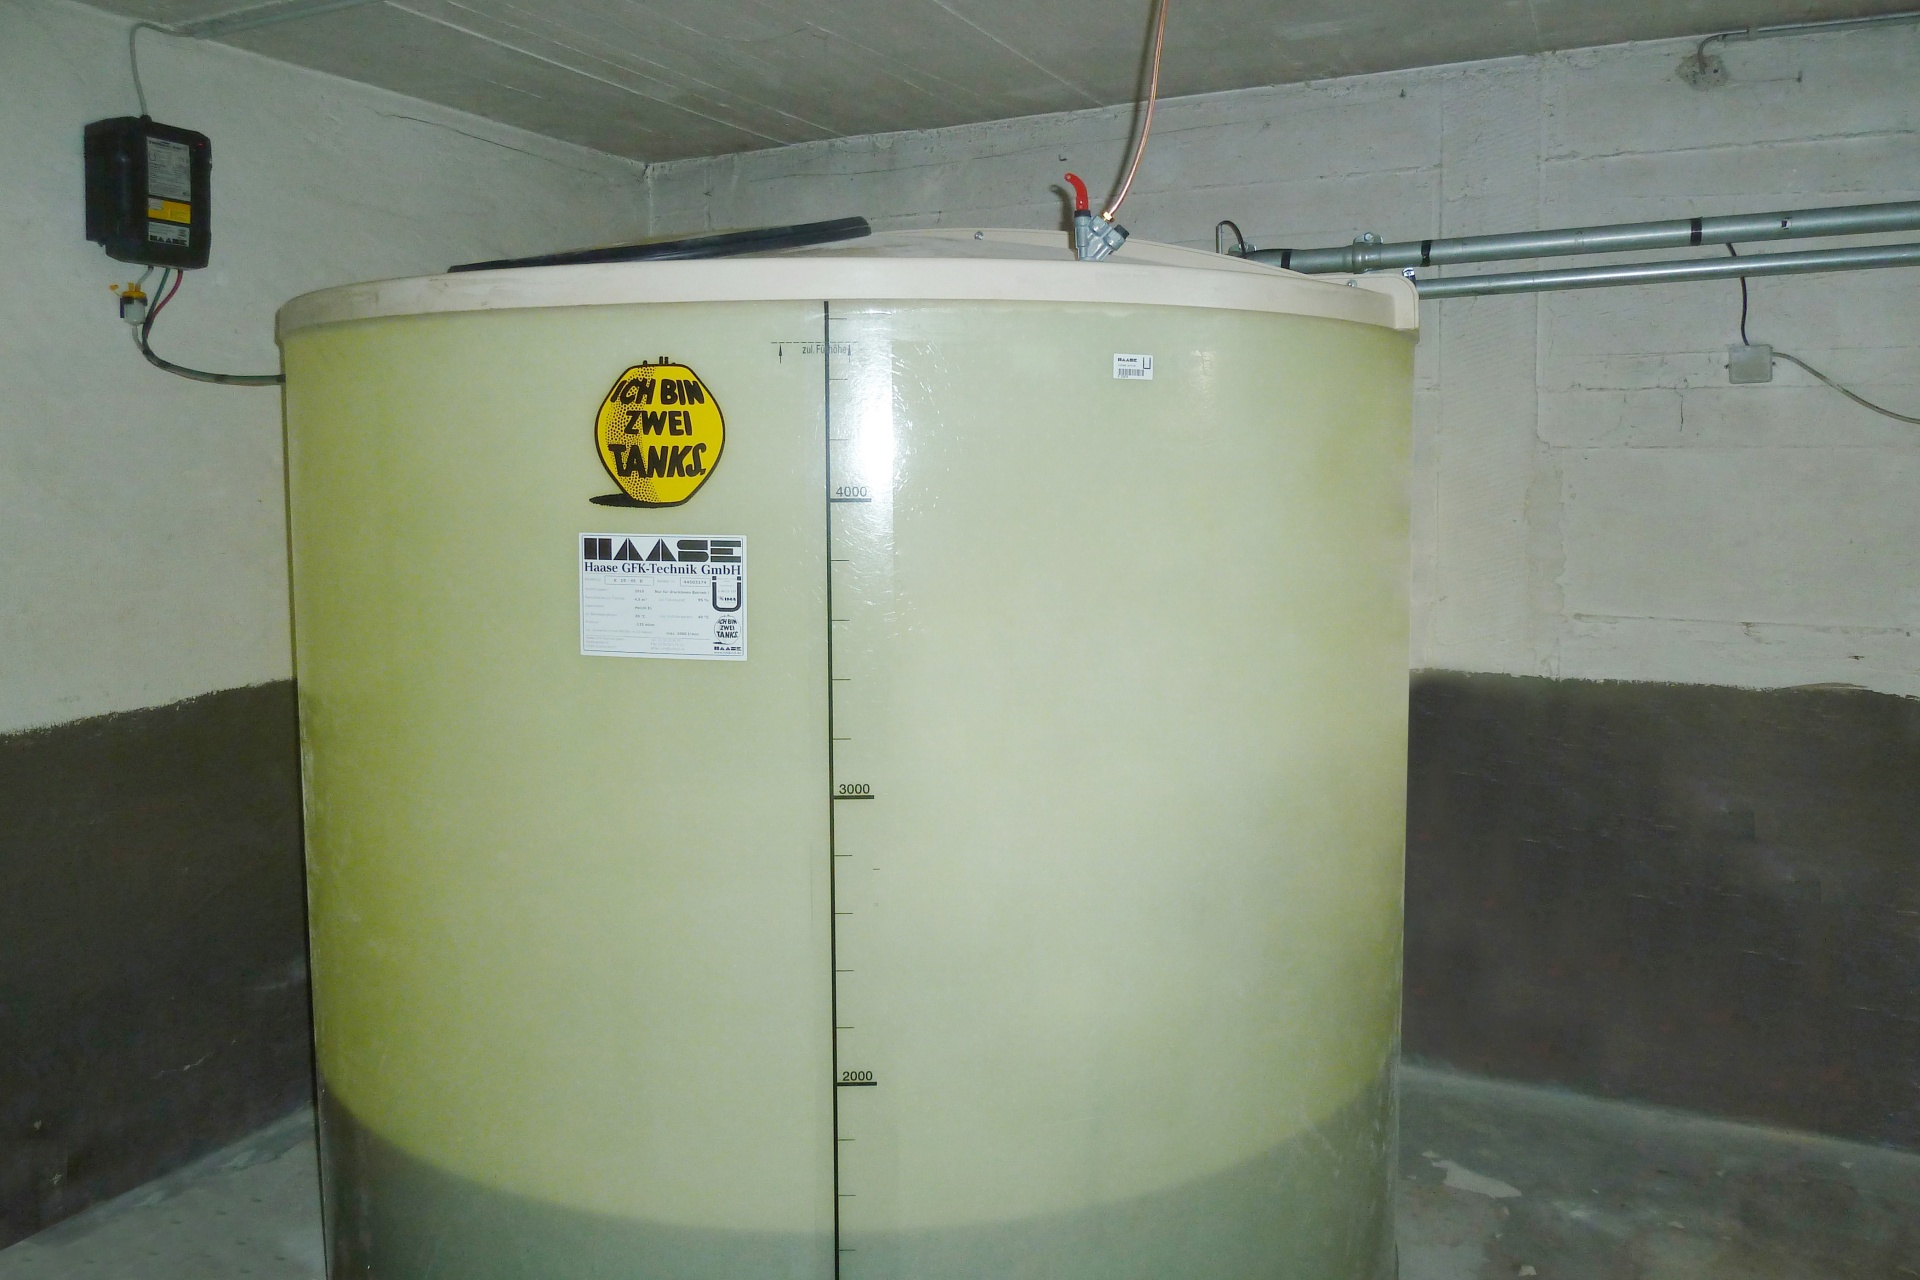 Haase basement tank is constructed with double walls and is absolutely odor-proof.